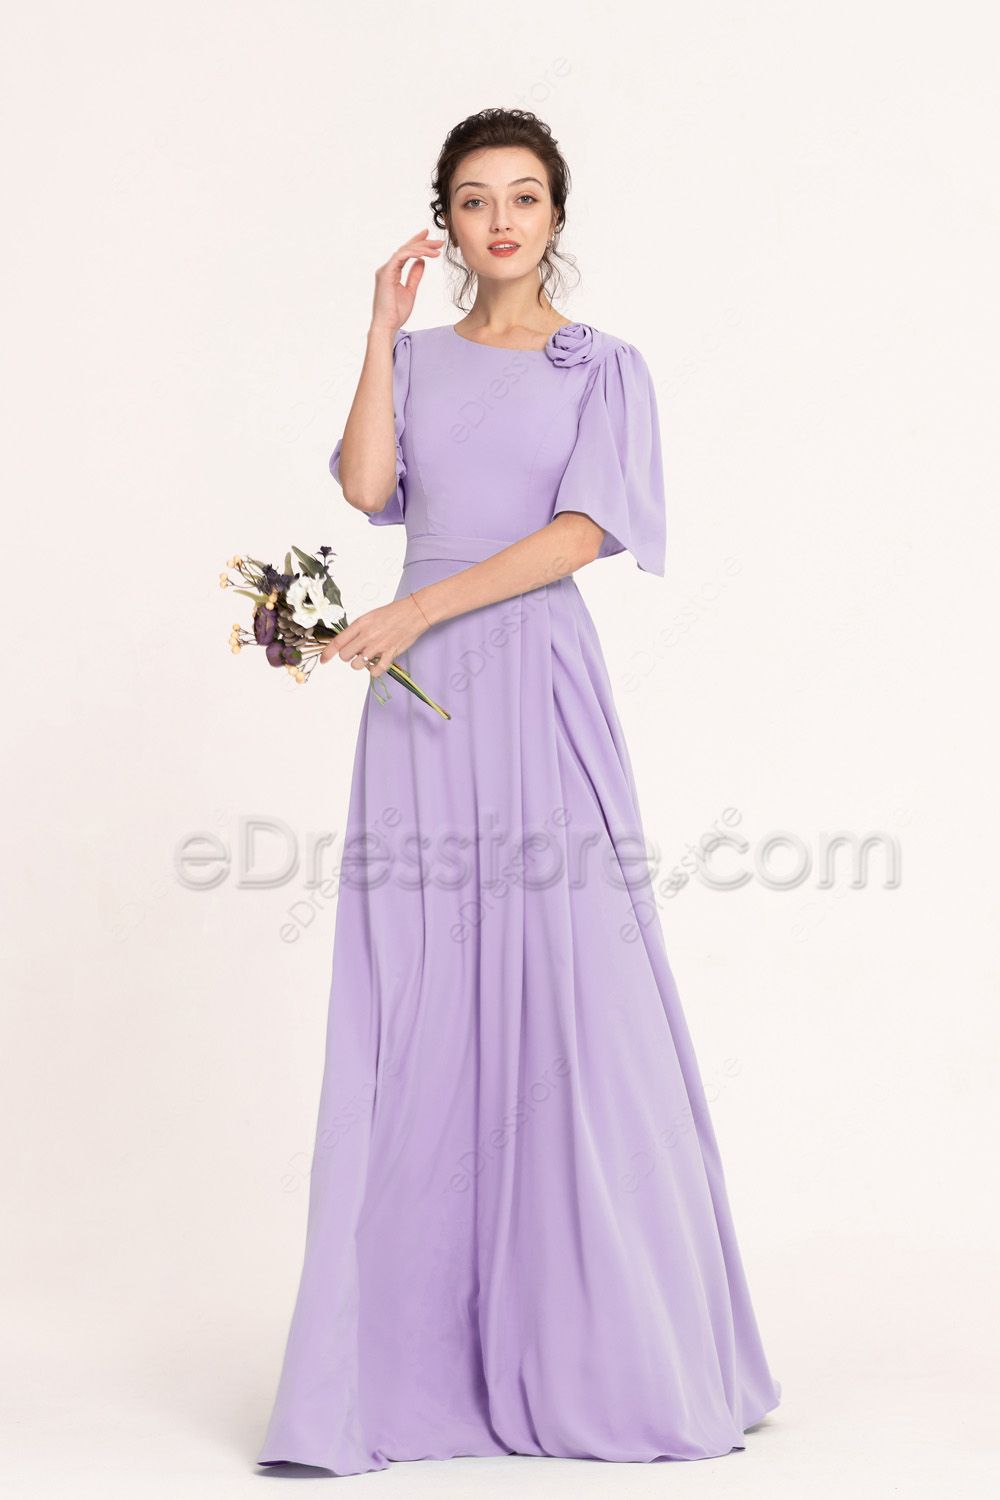 Modest Lilac Bridesmaid Dresses with Sleeves | eDresstore